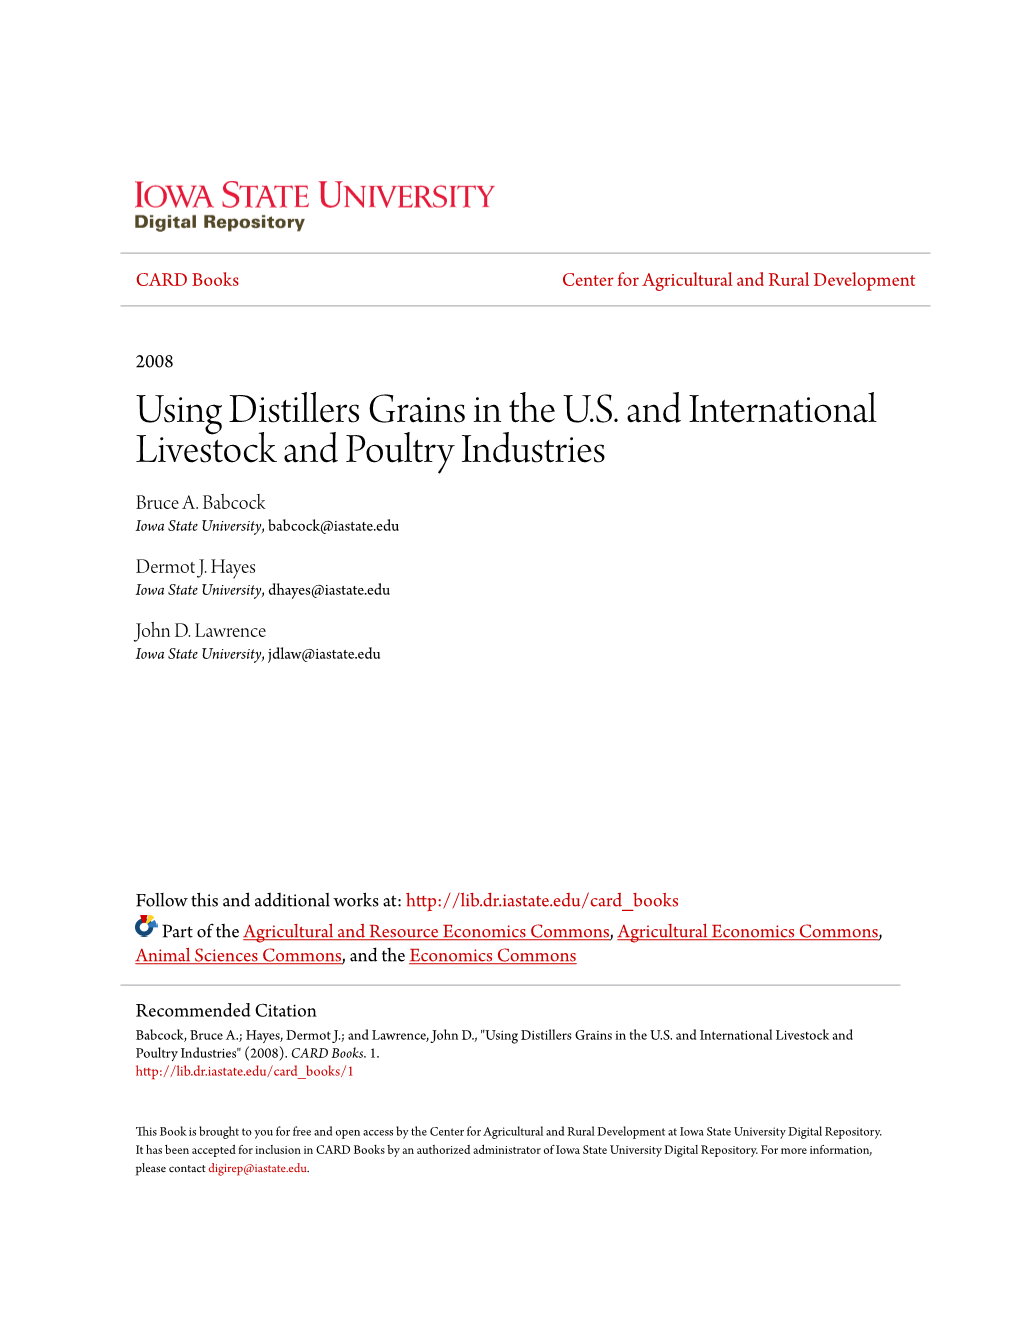 Using Distillers Grains in the U.S. and International Livestock and Poultry Industries Bruce A